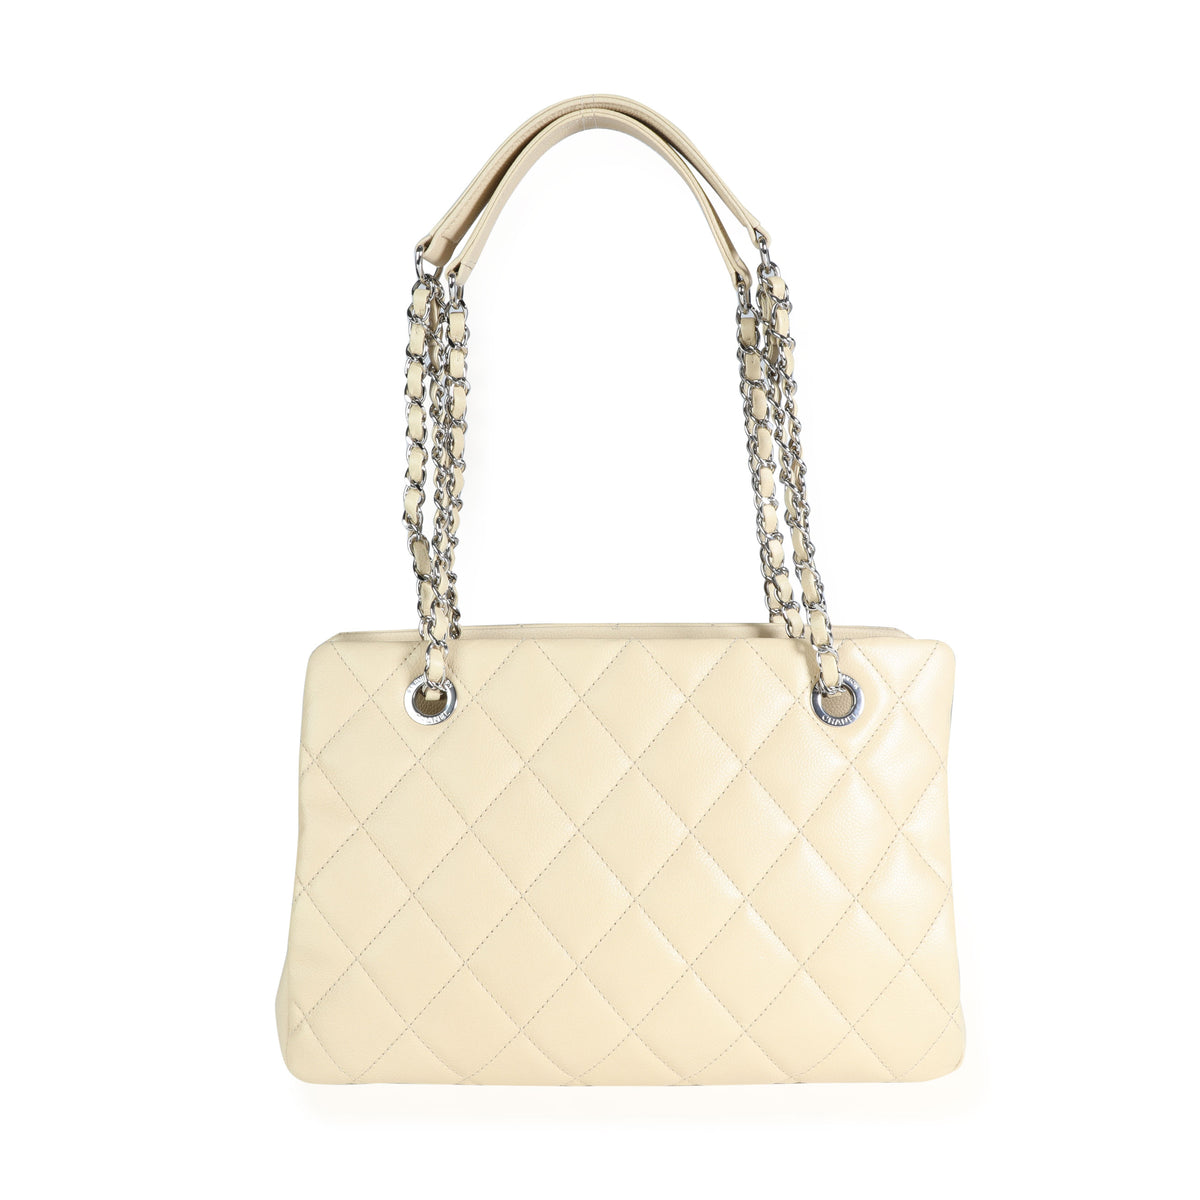 Chanel Light Beige Quilted Caviar Petite Timeless Tote, myGemma